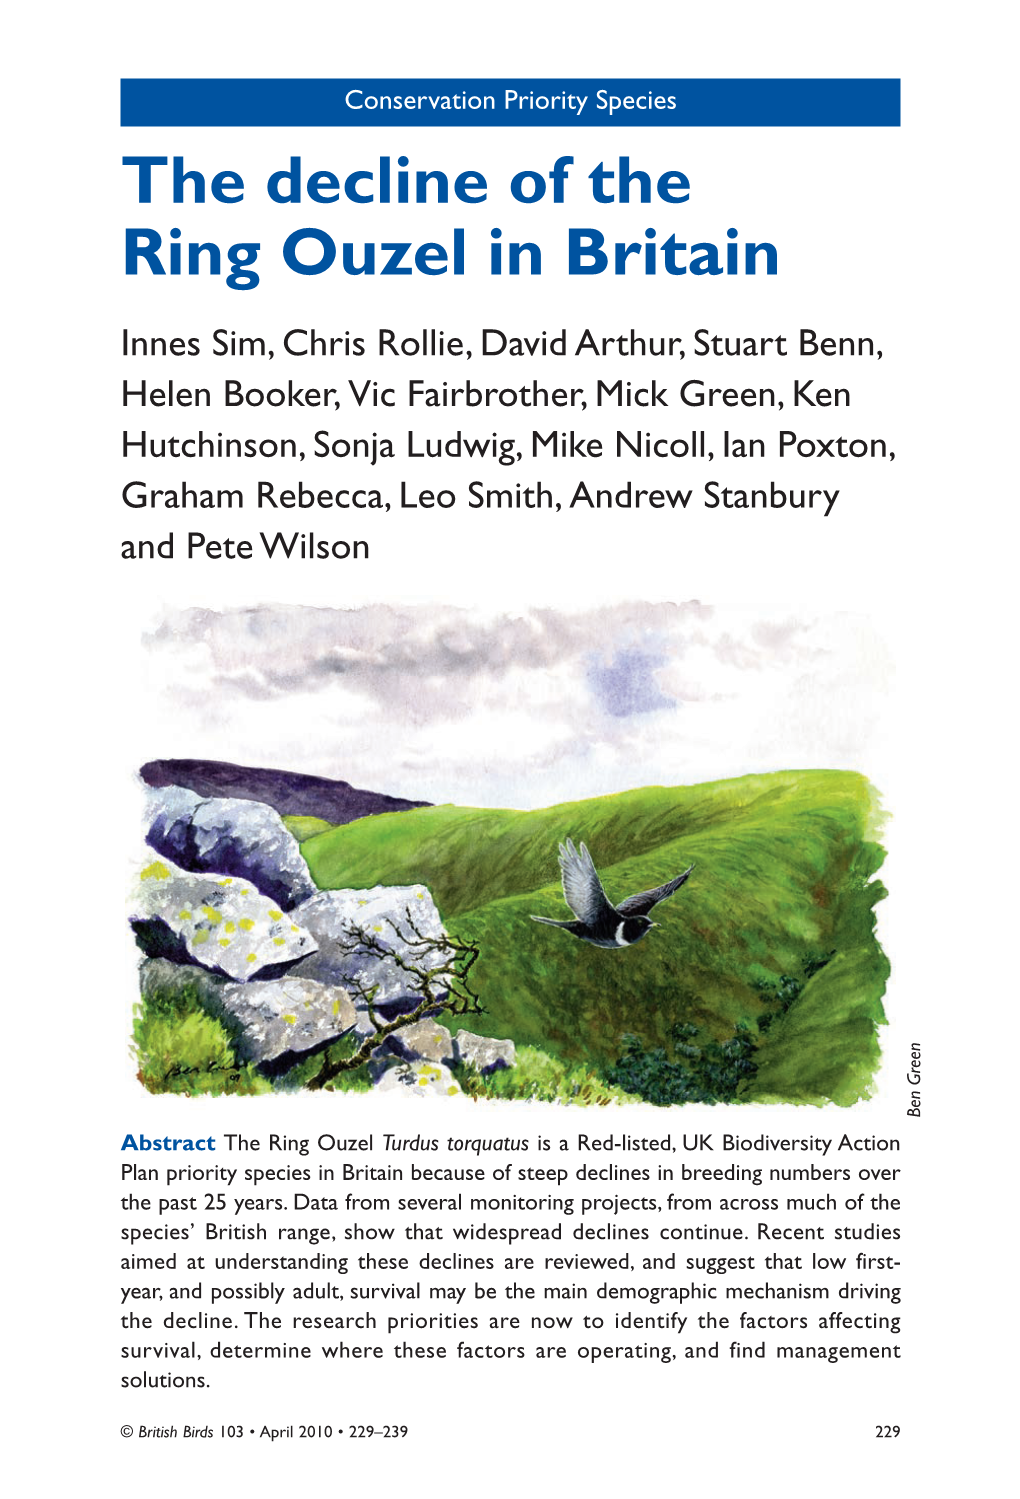 The Decline of the Ring Ouzel in Britain